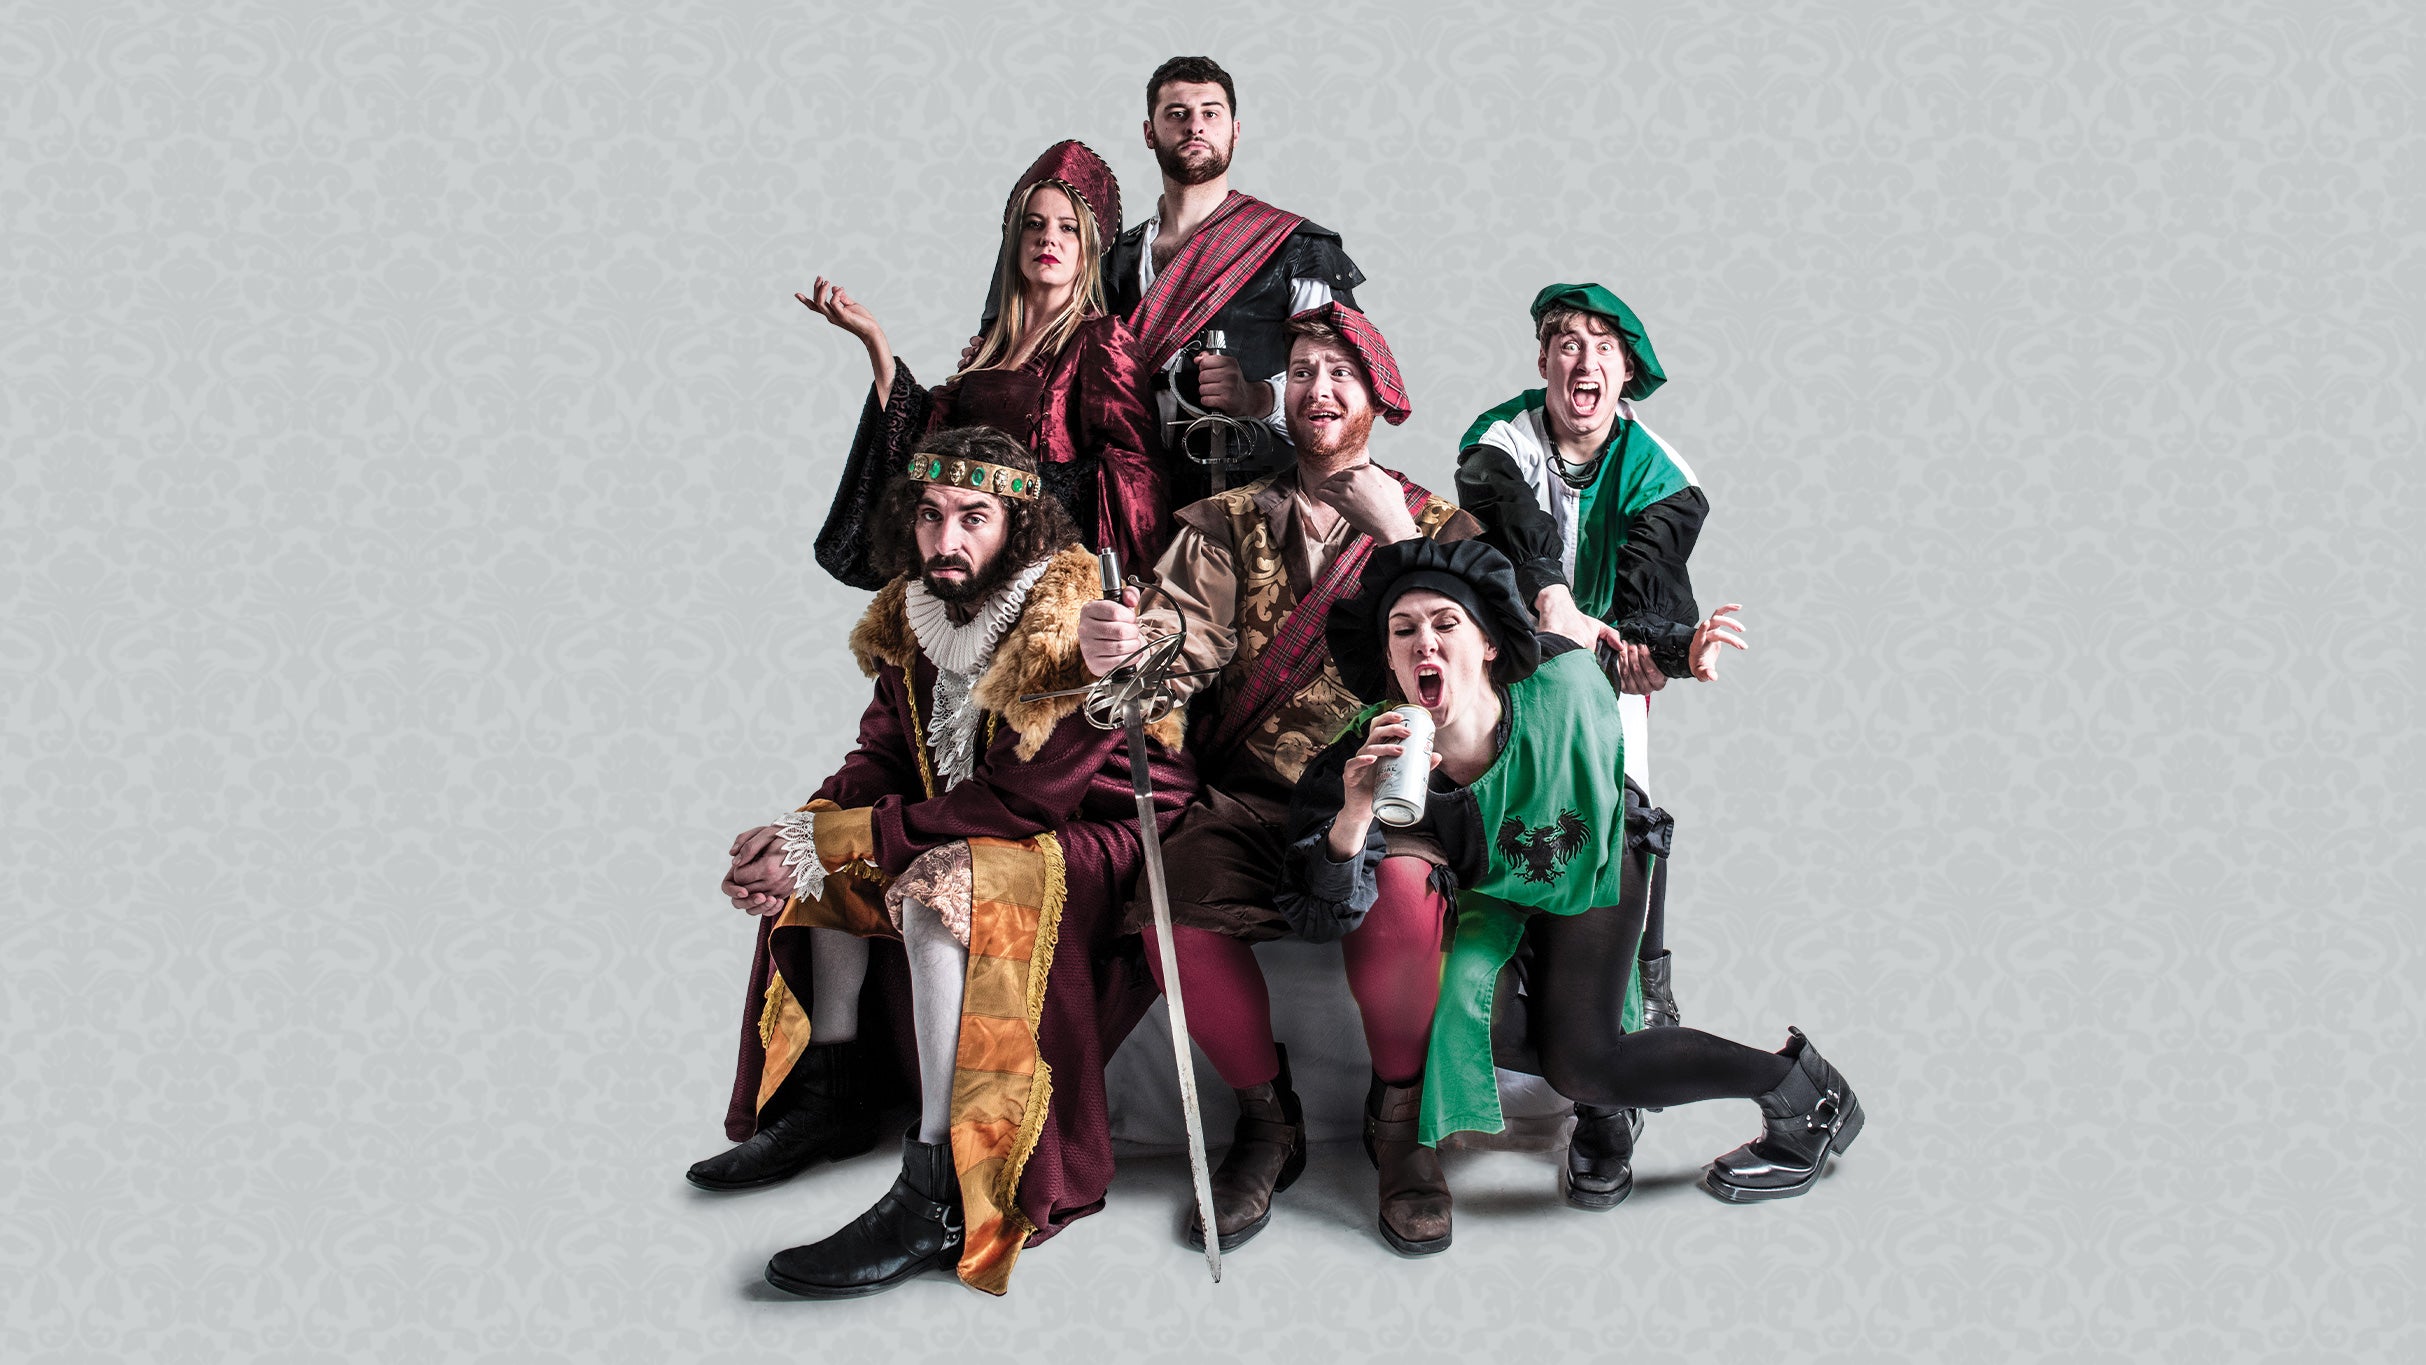 Sh!t-faced Shakespeare - Macbeth in Melbourne promo photo for A-List presale offer code